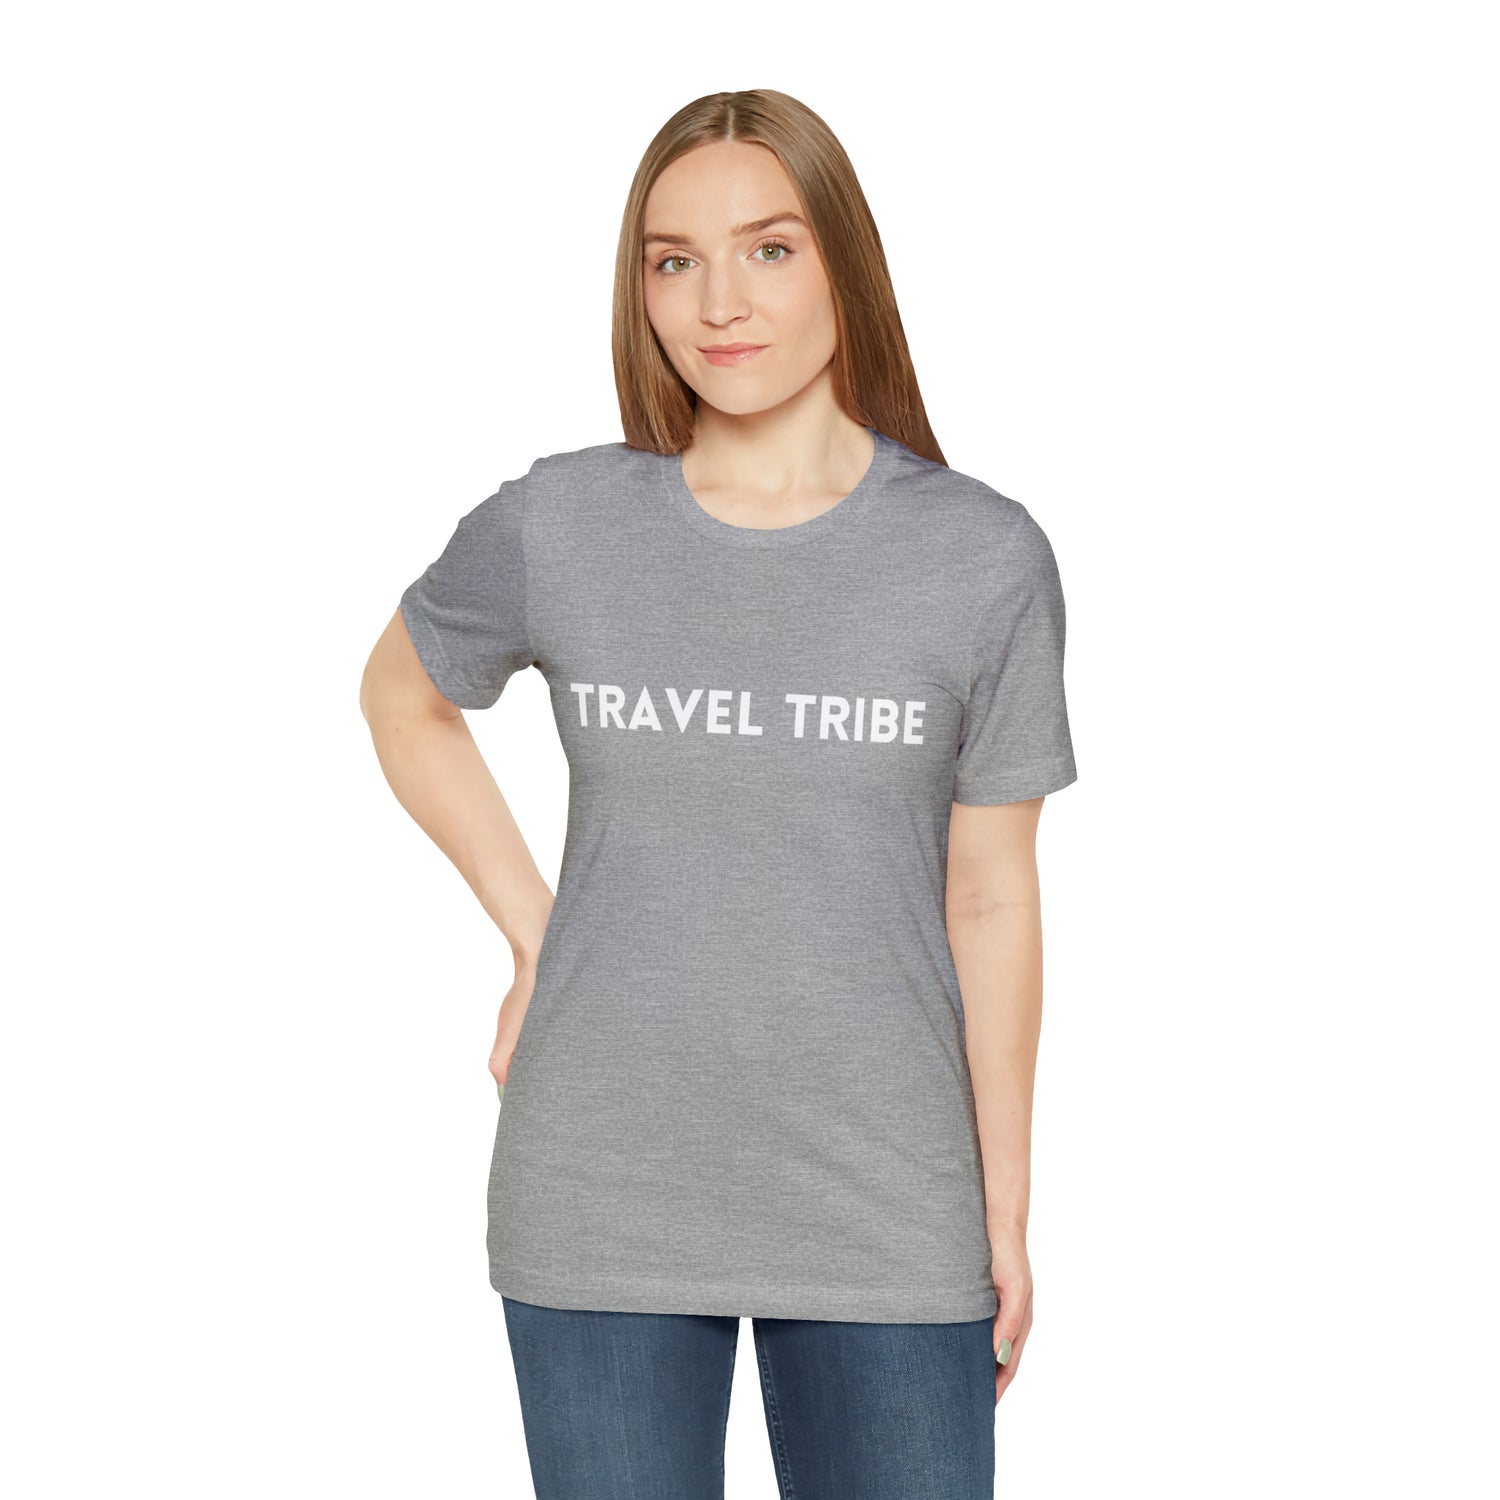 T-Shirt Tshirt Design Gift for Friend and Family Short Sleeved Shirt Travel Aesthetic T shirt for Vacation Petrova Designs